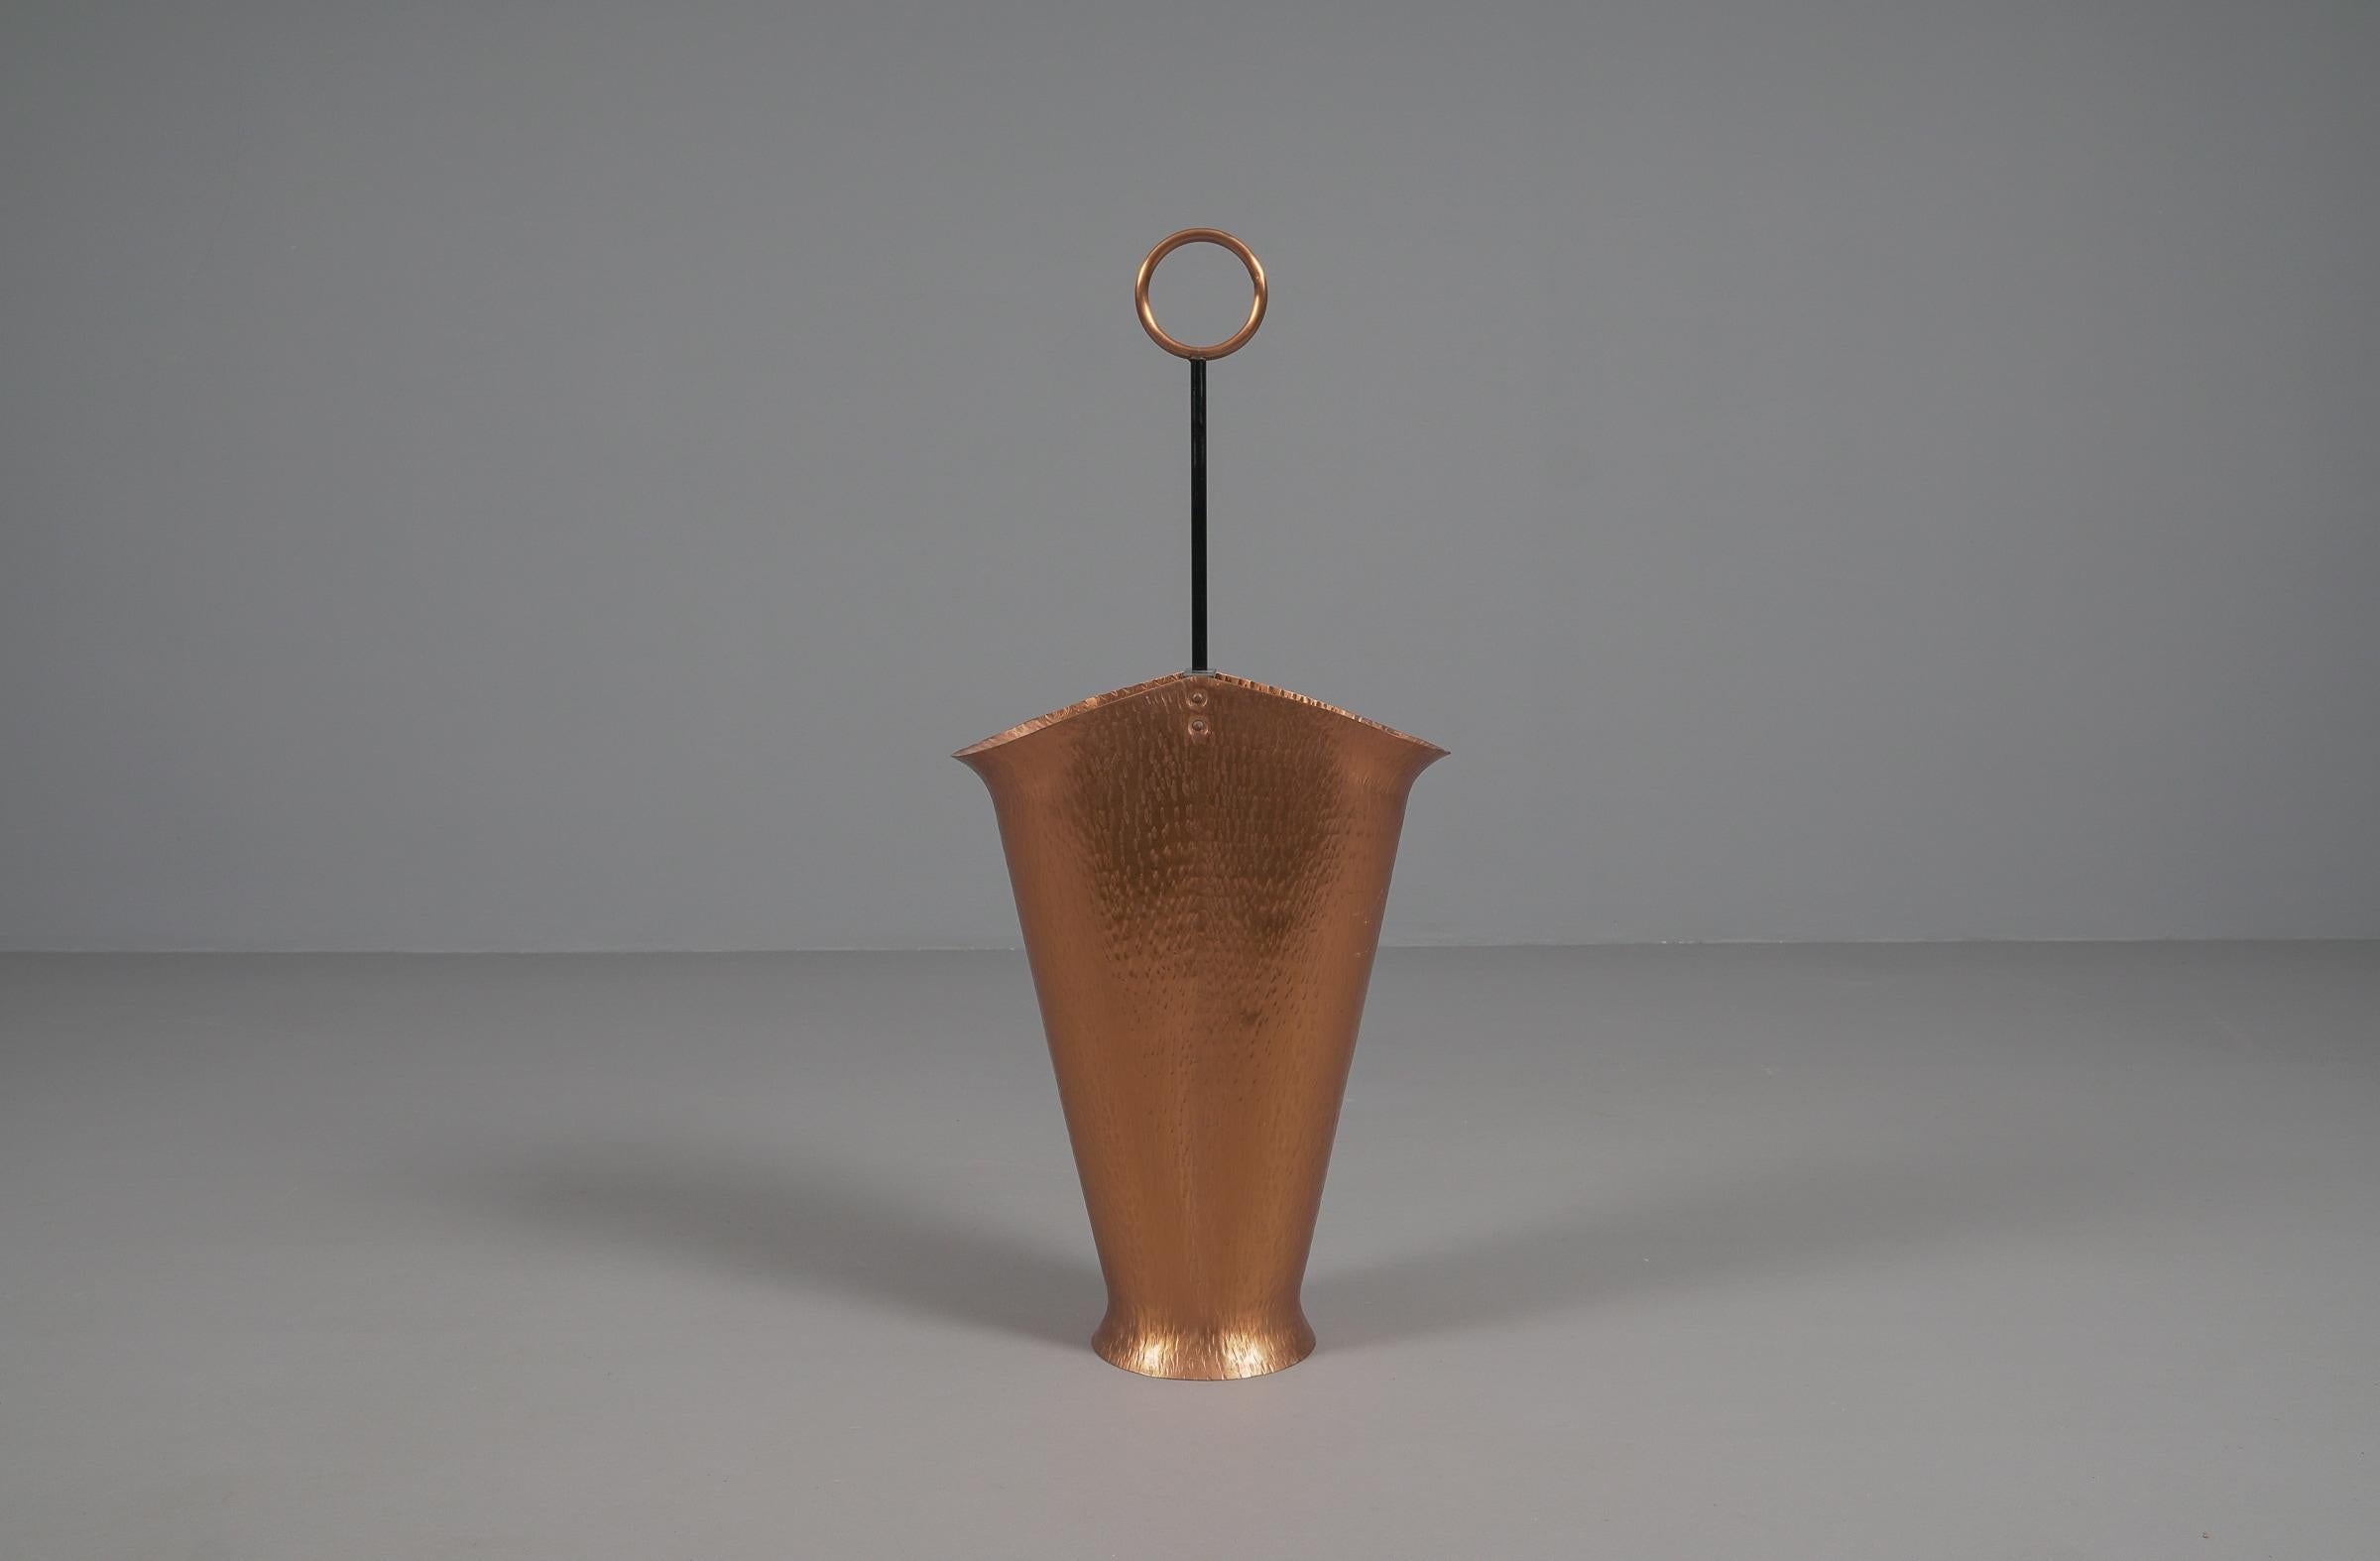 A great mix of materials. Brass and copper with an artistic finish.

